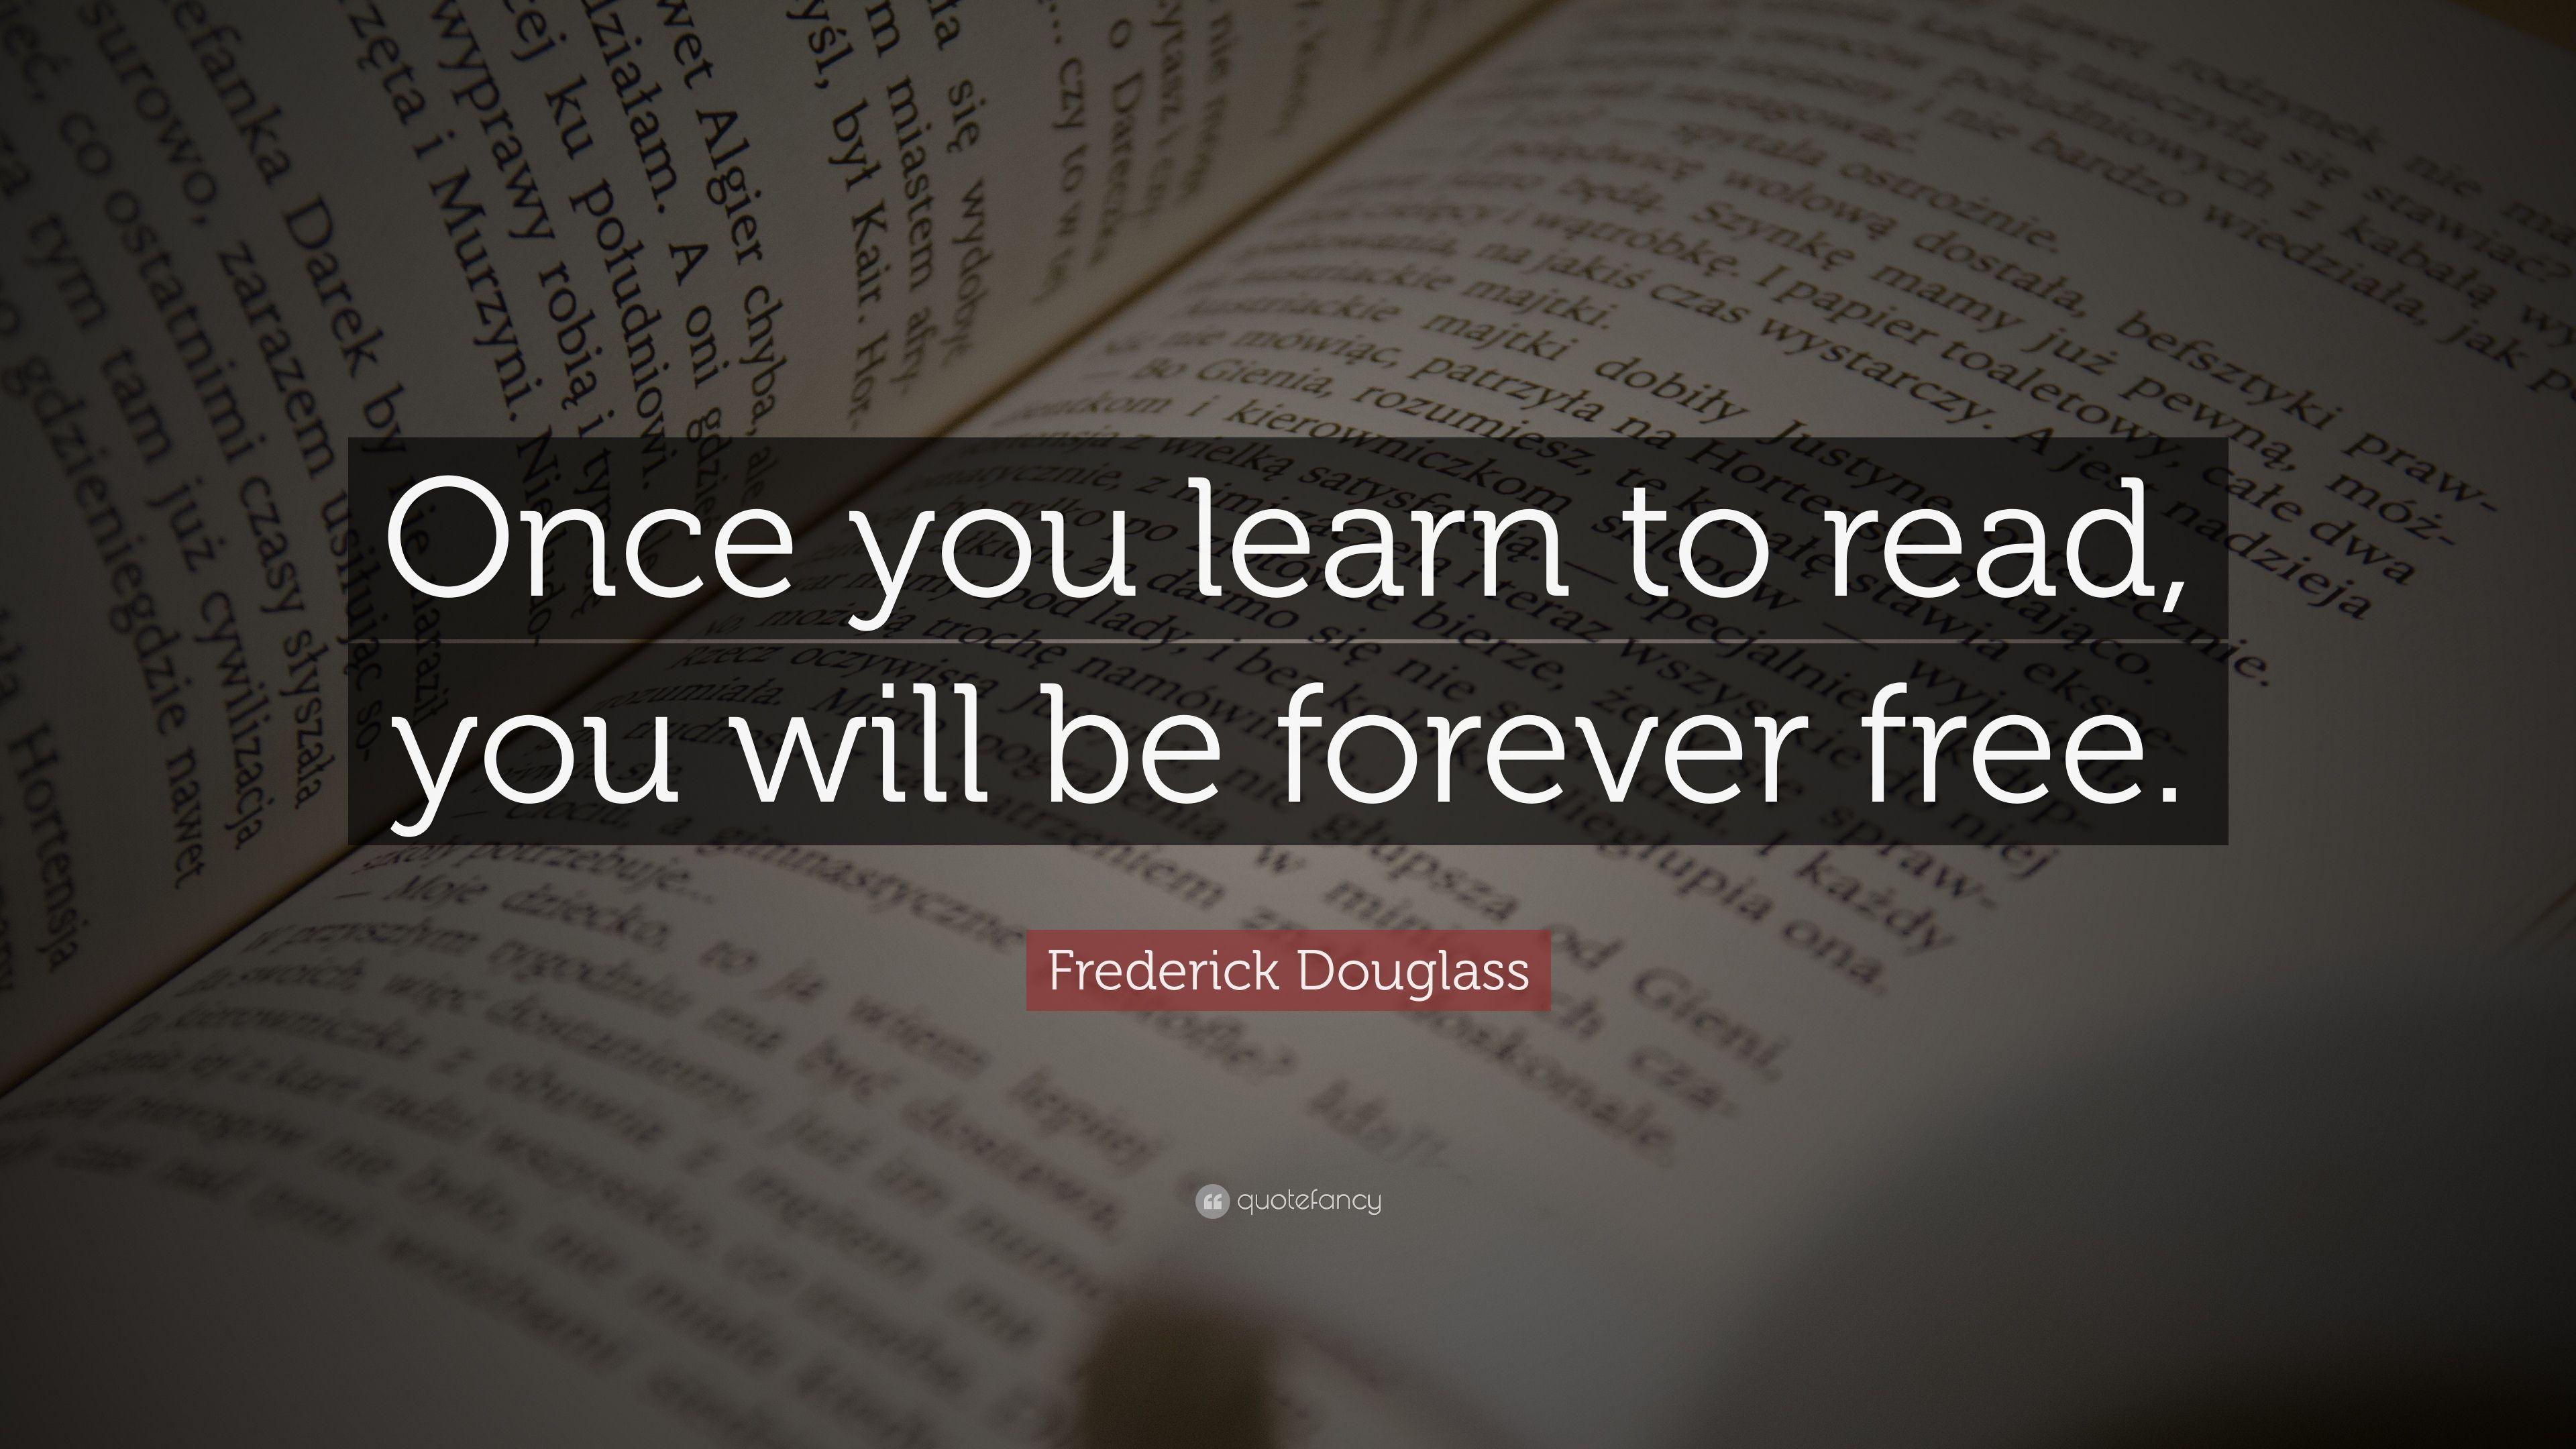 Frederick Douglass Quote: “Once you learn to read, you will be